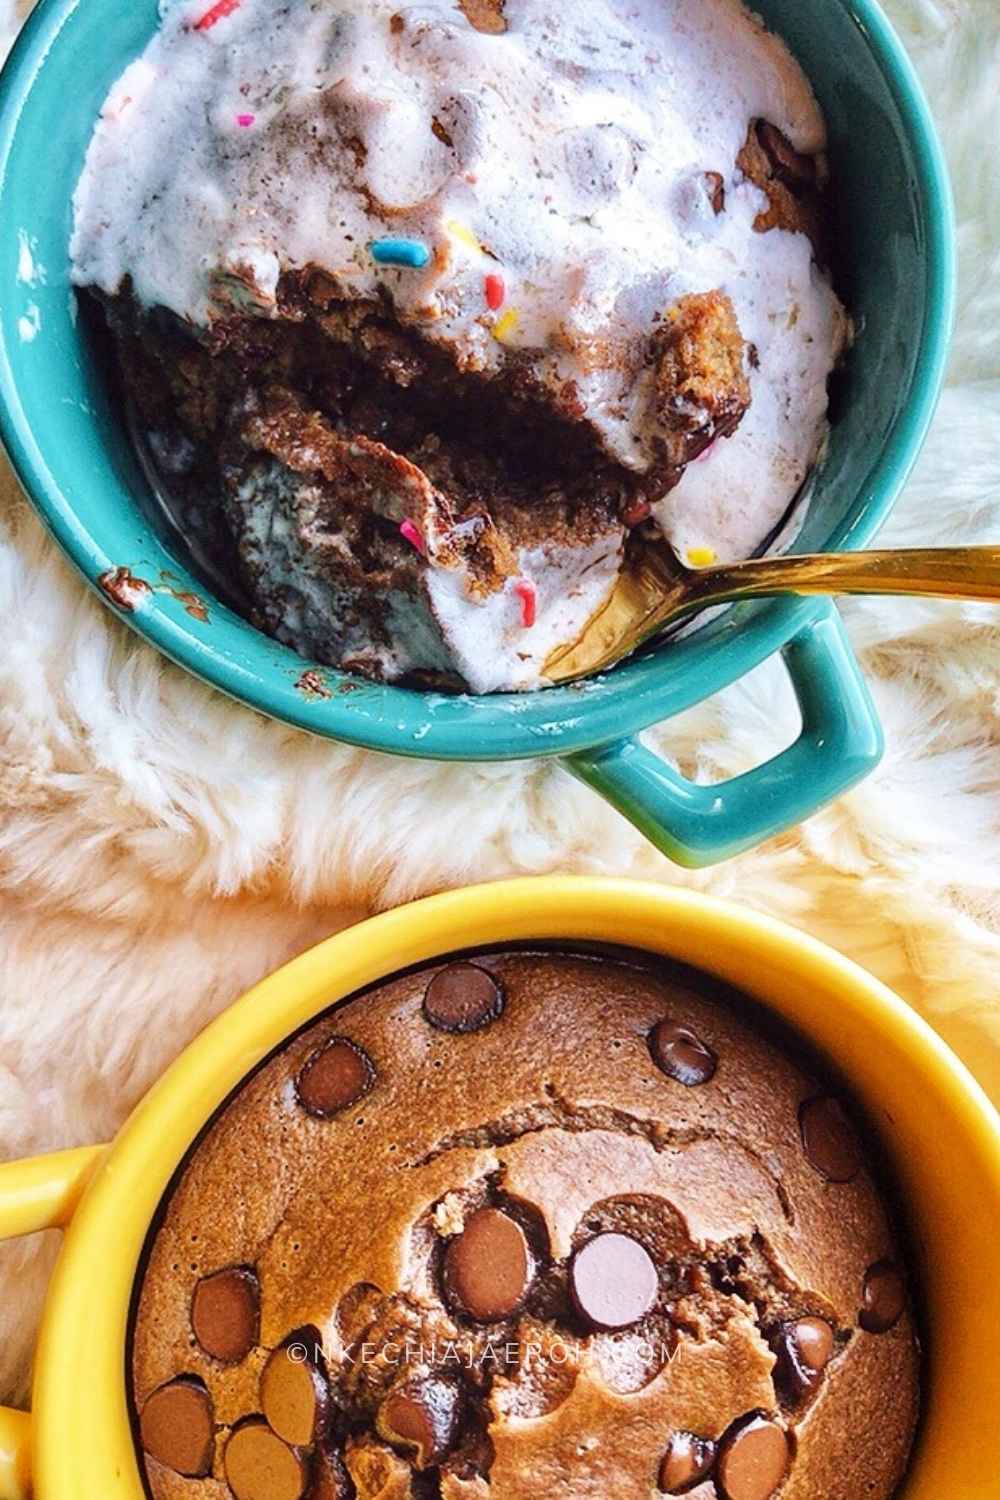 A delightful TikTok inspired chocolate baked oats recipe is the healthy brownie in a mug you need to start your day! This TikTok Viral Chocolate Baked Oats Recipe is a definition of cake for breakfast. Customize this recipe to suit your taste, add the flavors you want!  Making baked oatmeal is easy and requires only two steps - blend, bake, and enjoy! This recipe makes for a wholesome breakfast, or dessert everyone member of your family will love. Top this with a little yogurt, icing, more melted chocolate, or any nut/seed spread of choice to get the best out of it! #bakeoats #TikTokhack #bakedoatmeal #oatmeal #healthybreakfast #oatcake #tikTokrecipe